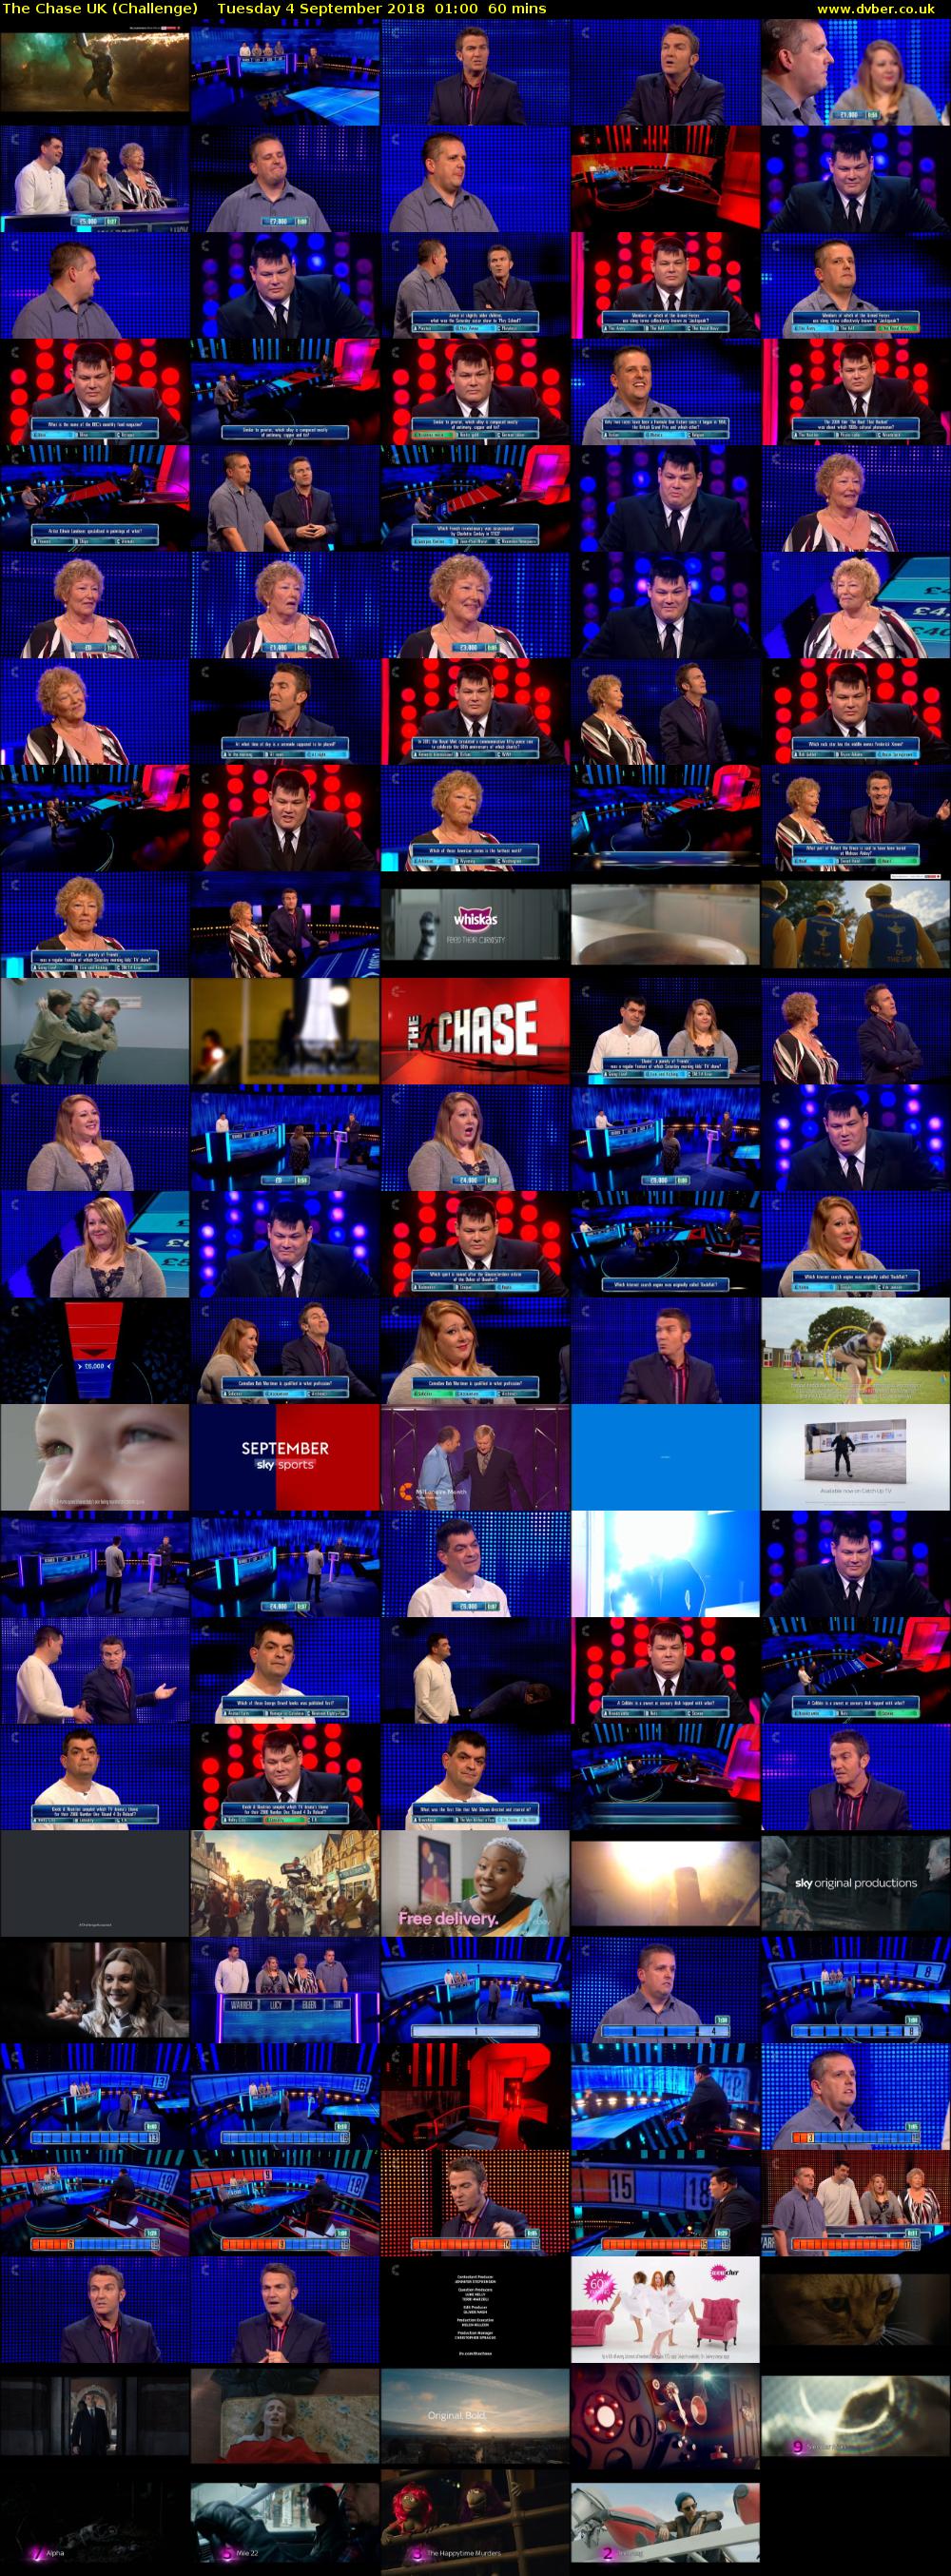 The Chase UK (Challenge) Tuesday 4 September 2018 01:00 - 02:00